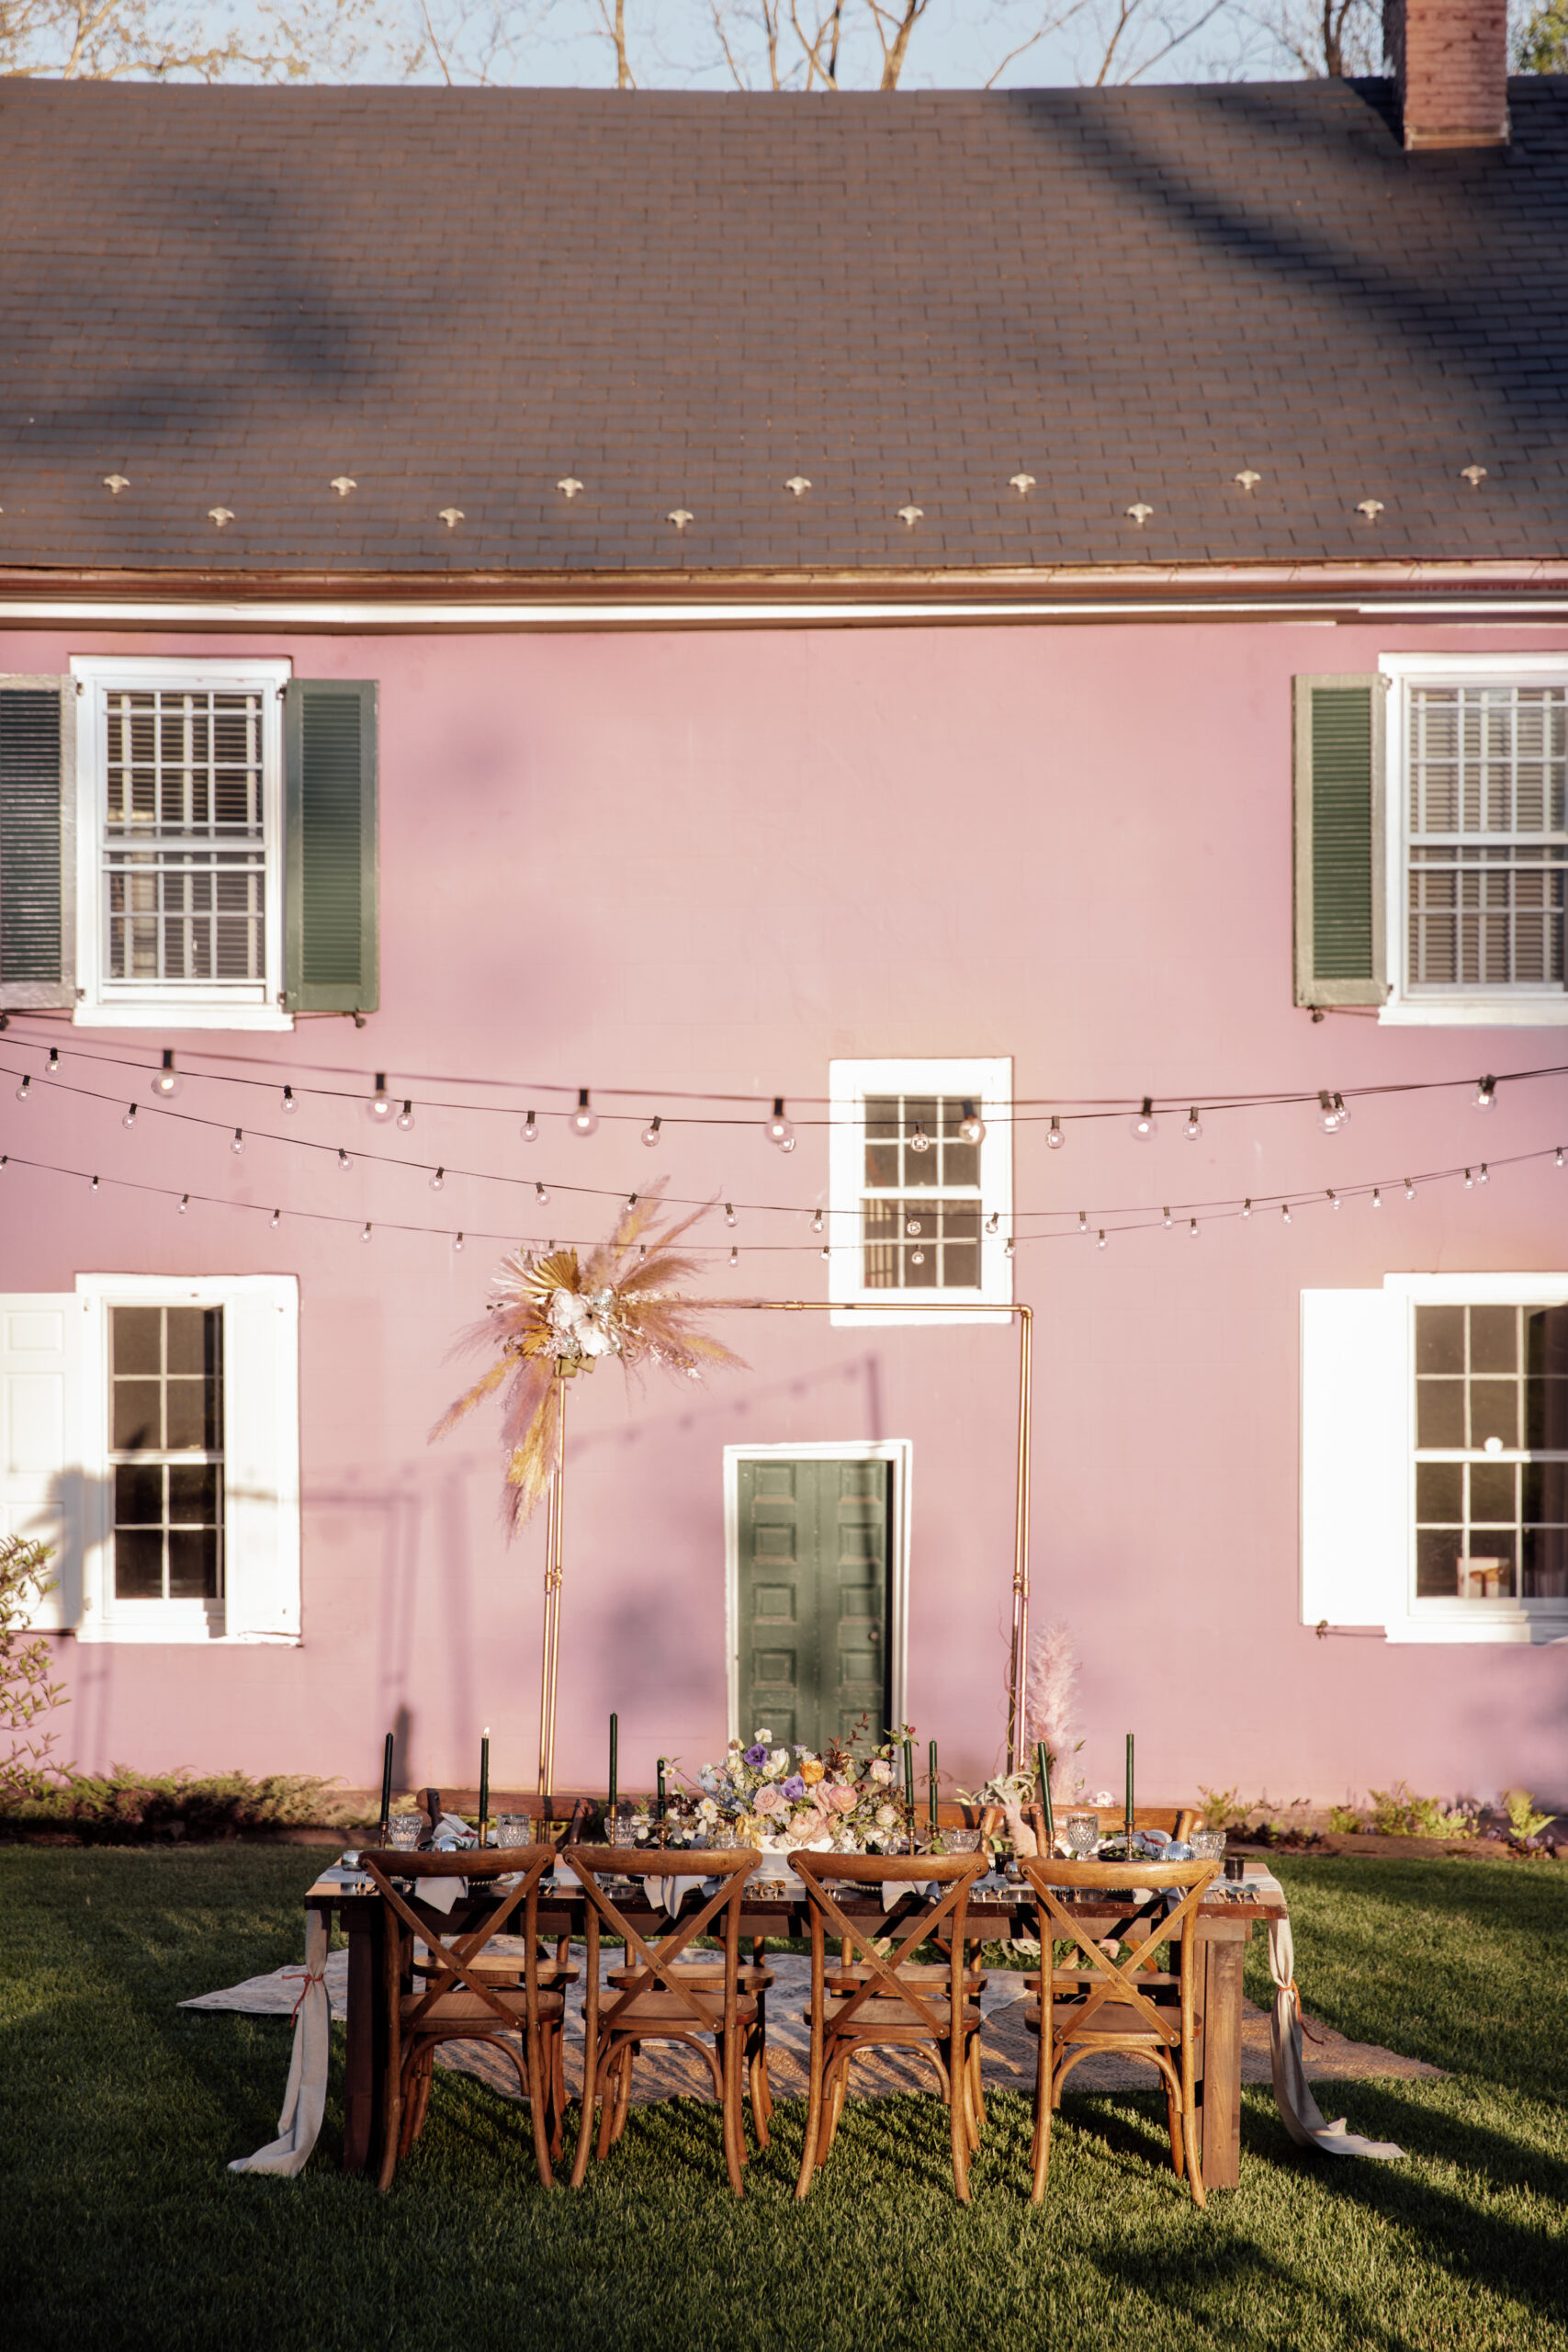 Image of farmhouse tables, crossback chairs, and copper wedding arch set up in courtyard with pink house in the background